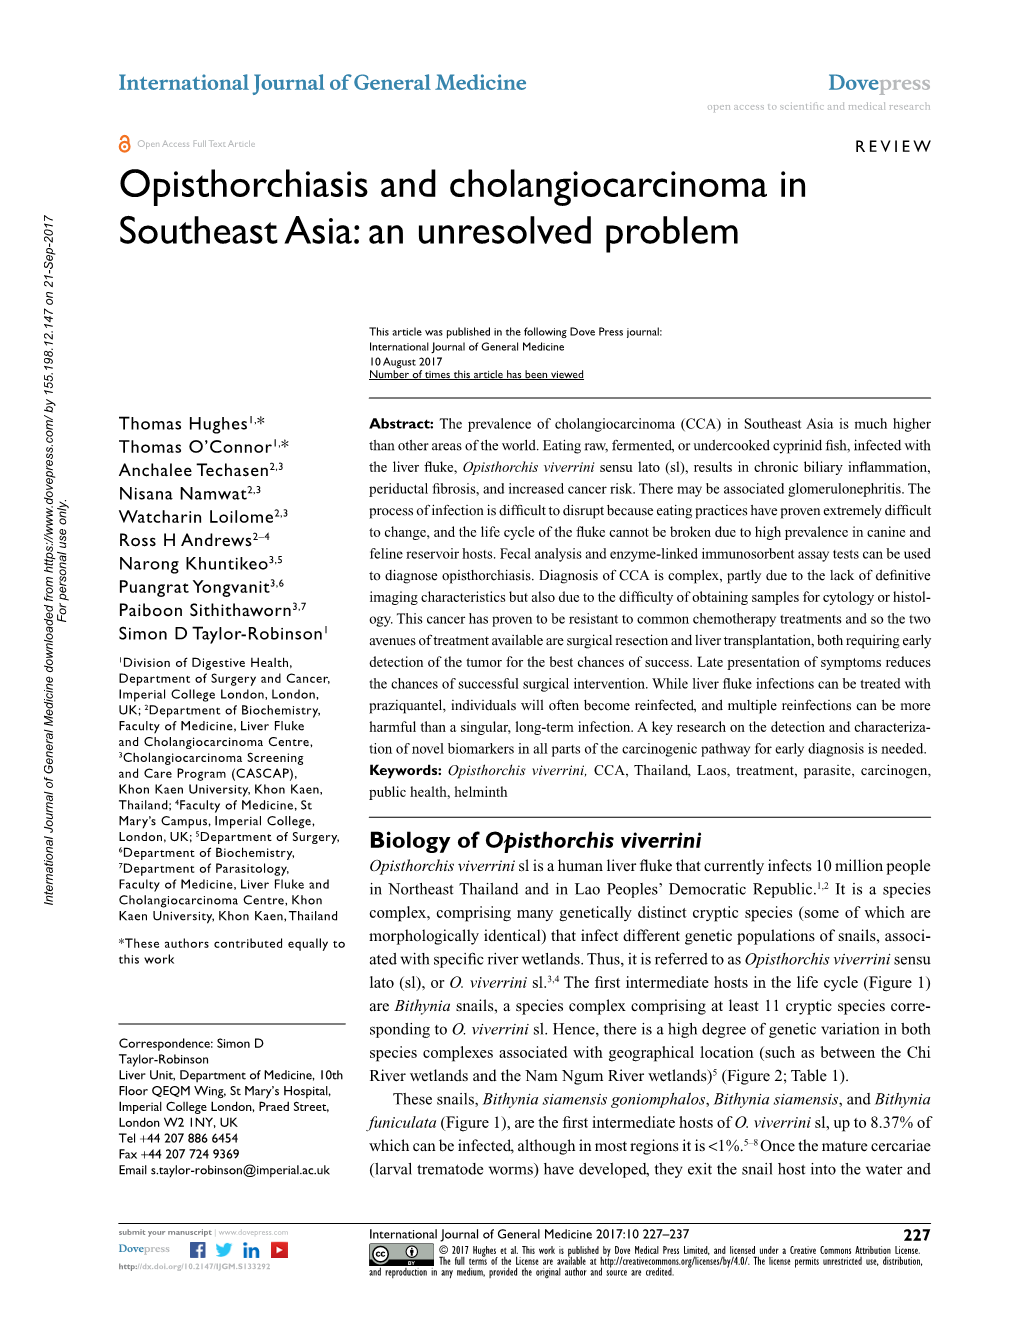 Opisthorchiasis and Cholangiocarcinoma in Southeast Asia: an Unresolved Problem